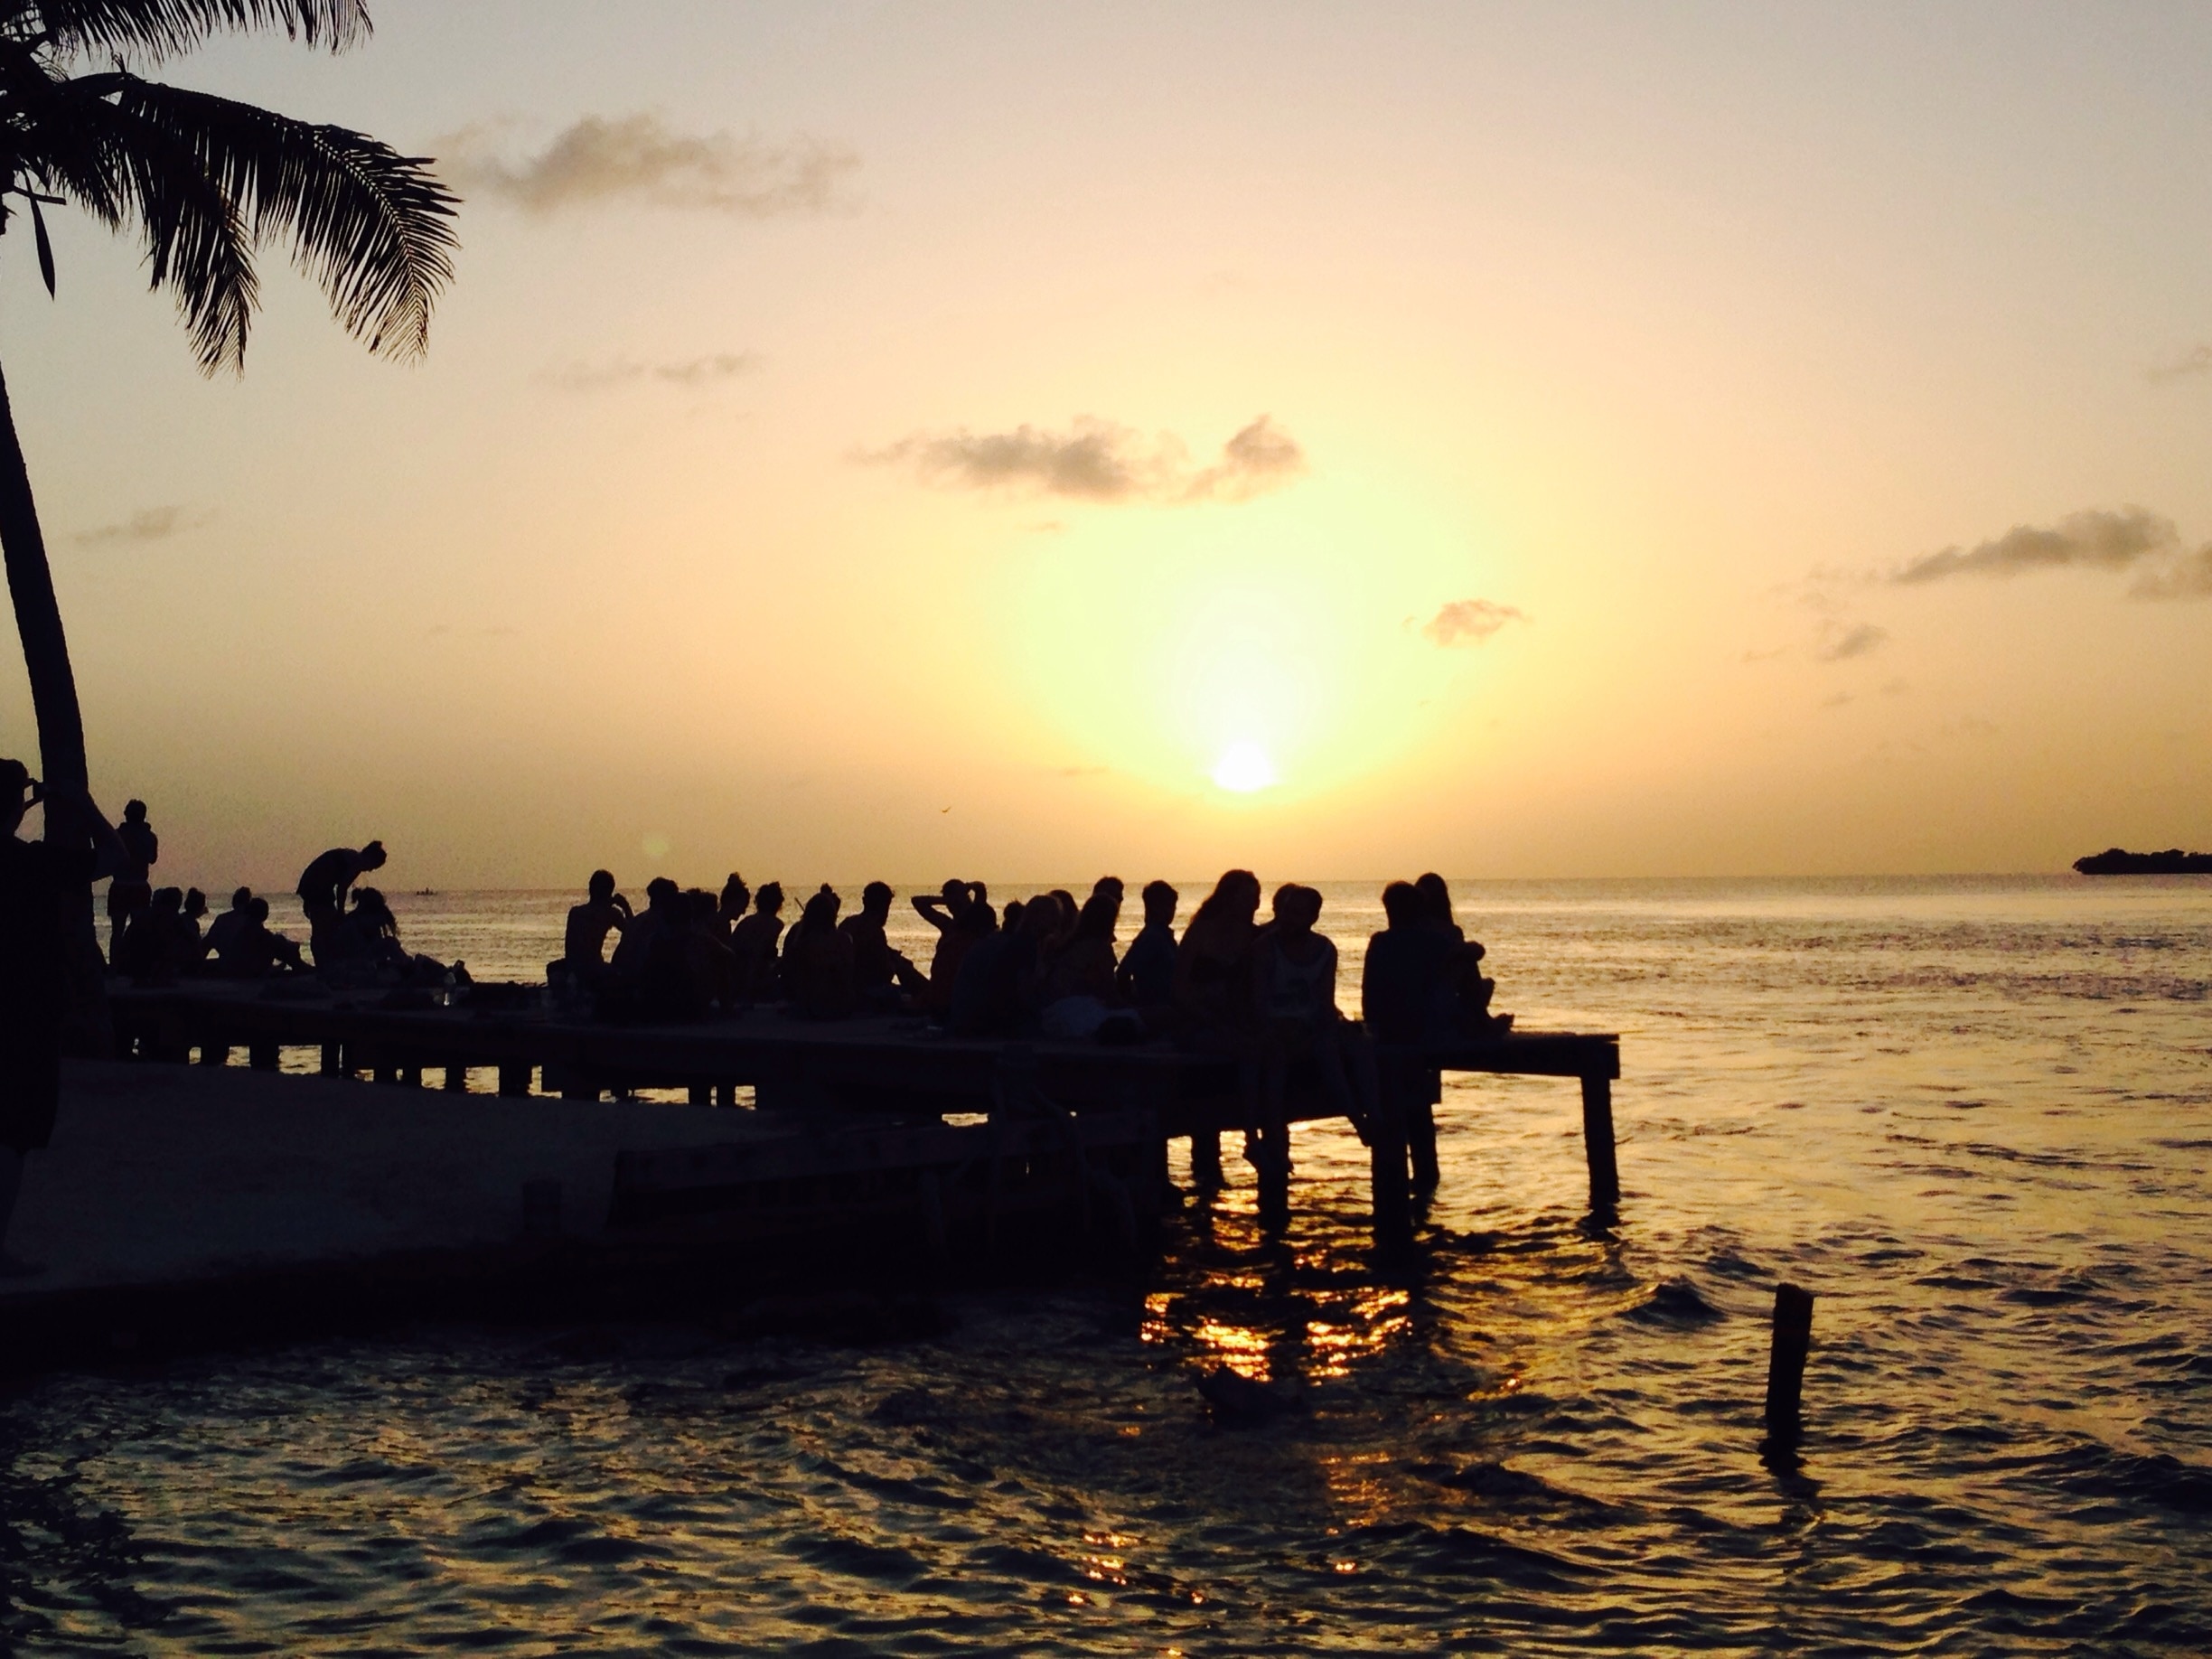 Sunset at The Split Bar Caye Caulker after a days scuba diving the blue hole. I would recommend Frenchie's dive school if you plan to do any diving in Caye Caulker. 